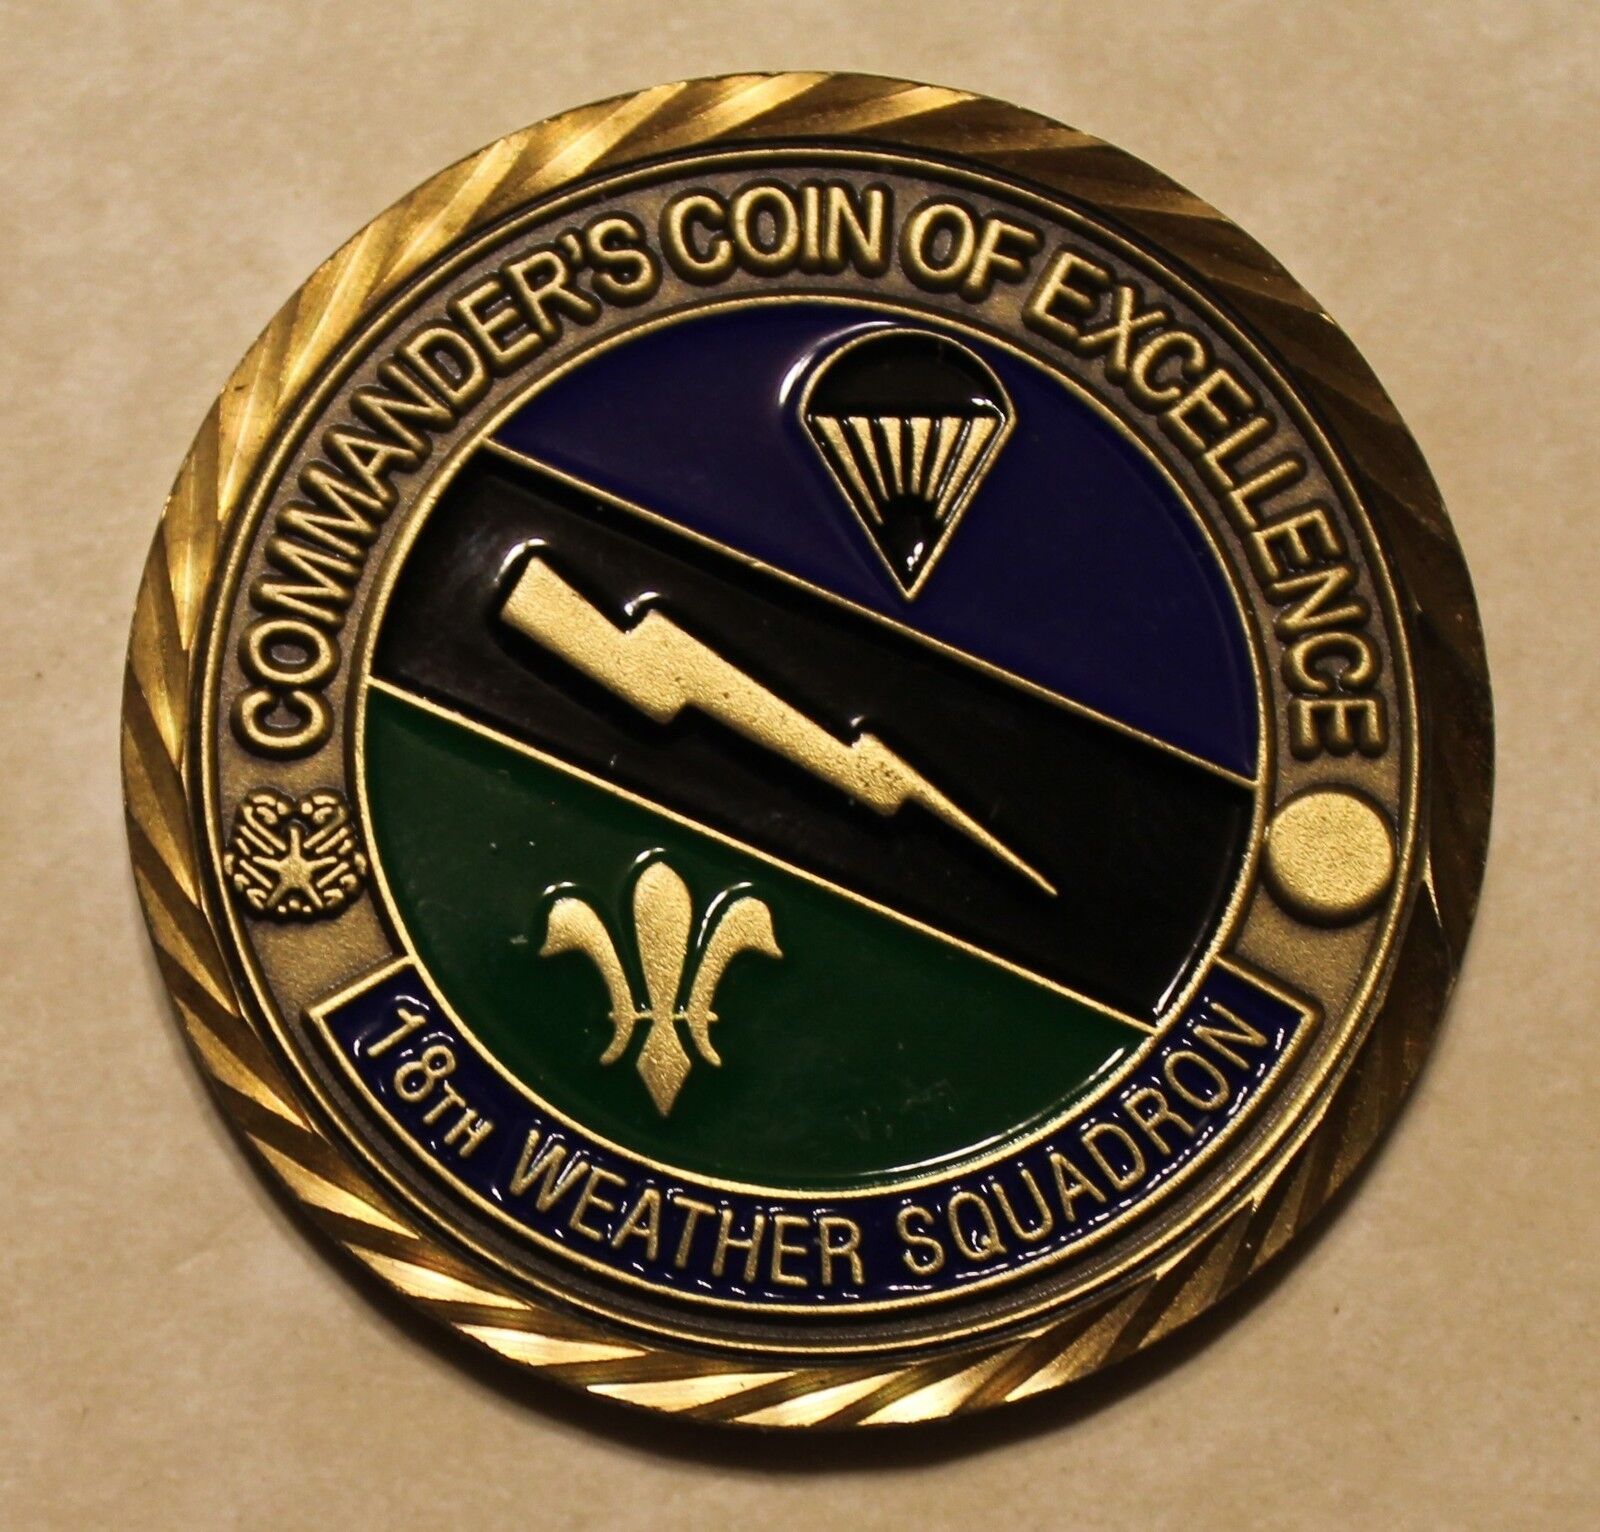 18th Weather Squadron Special Operations Commanders Air Force Challenge Coin